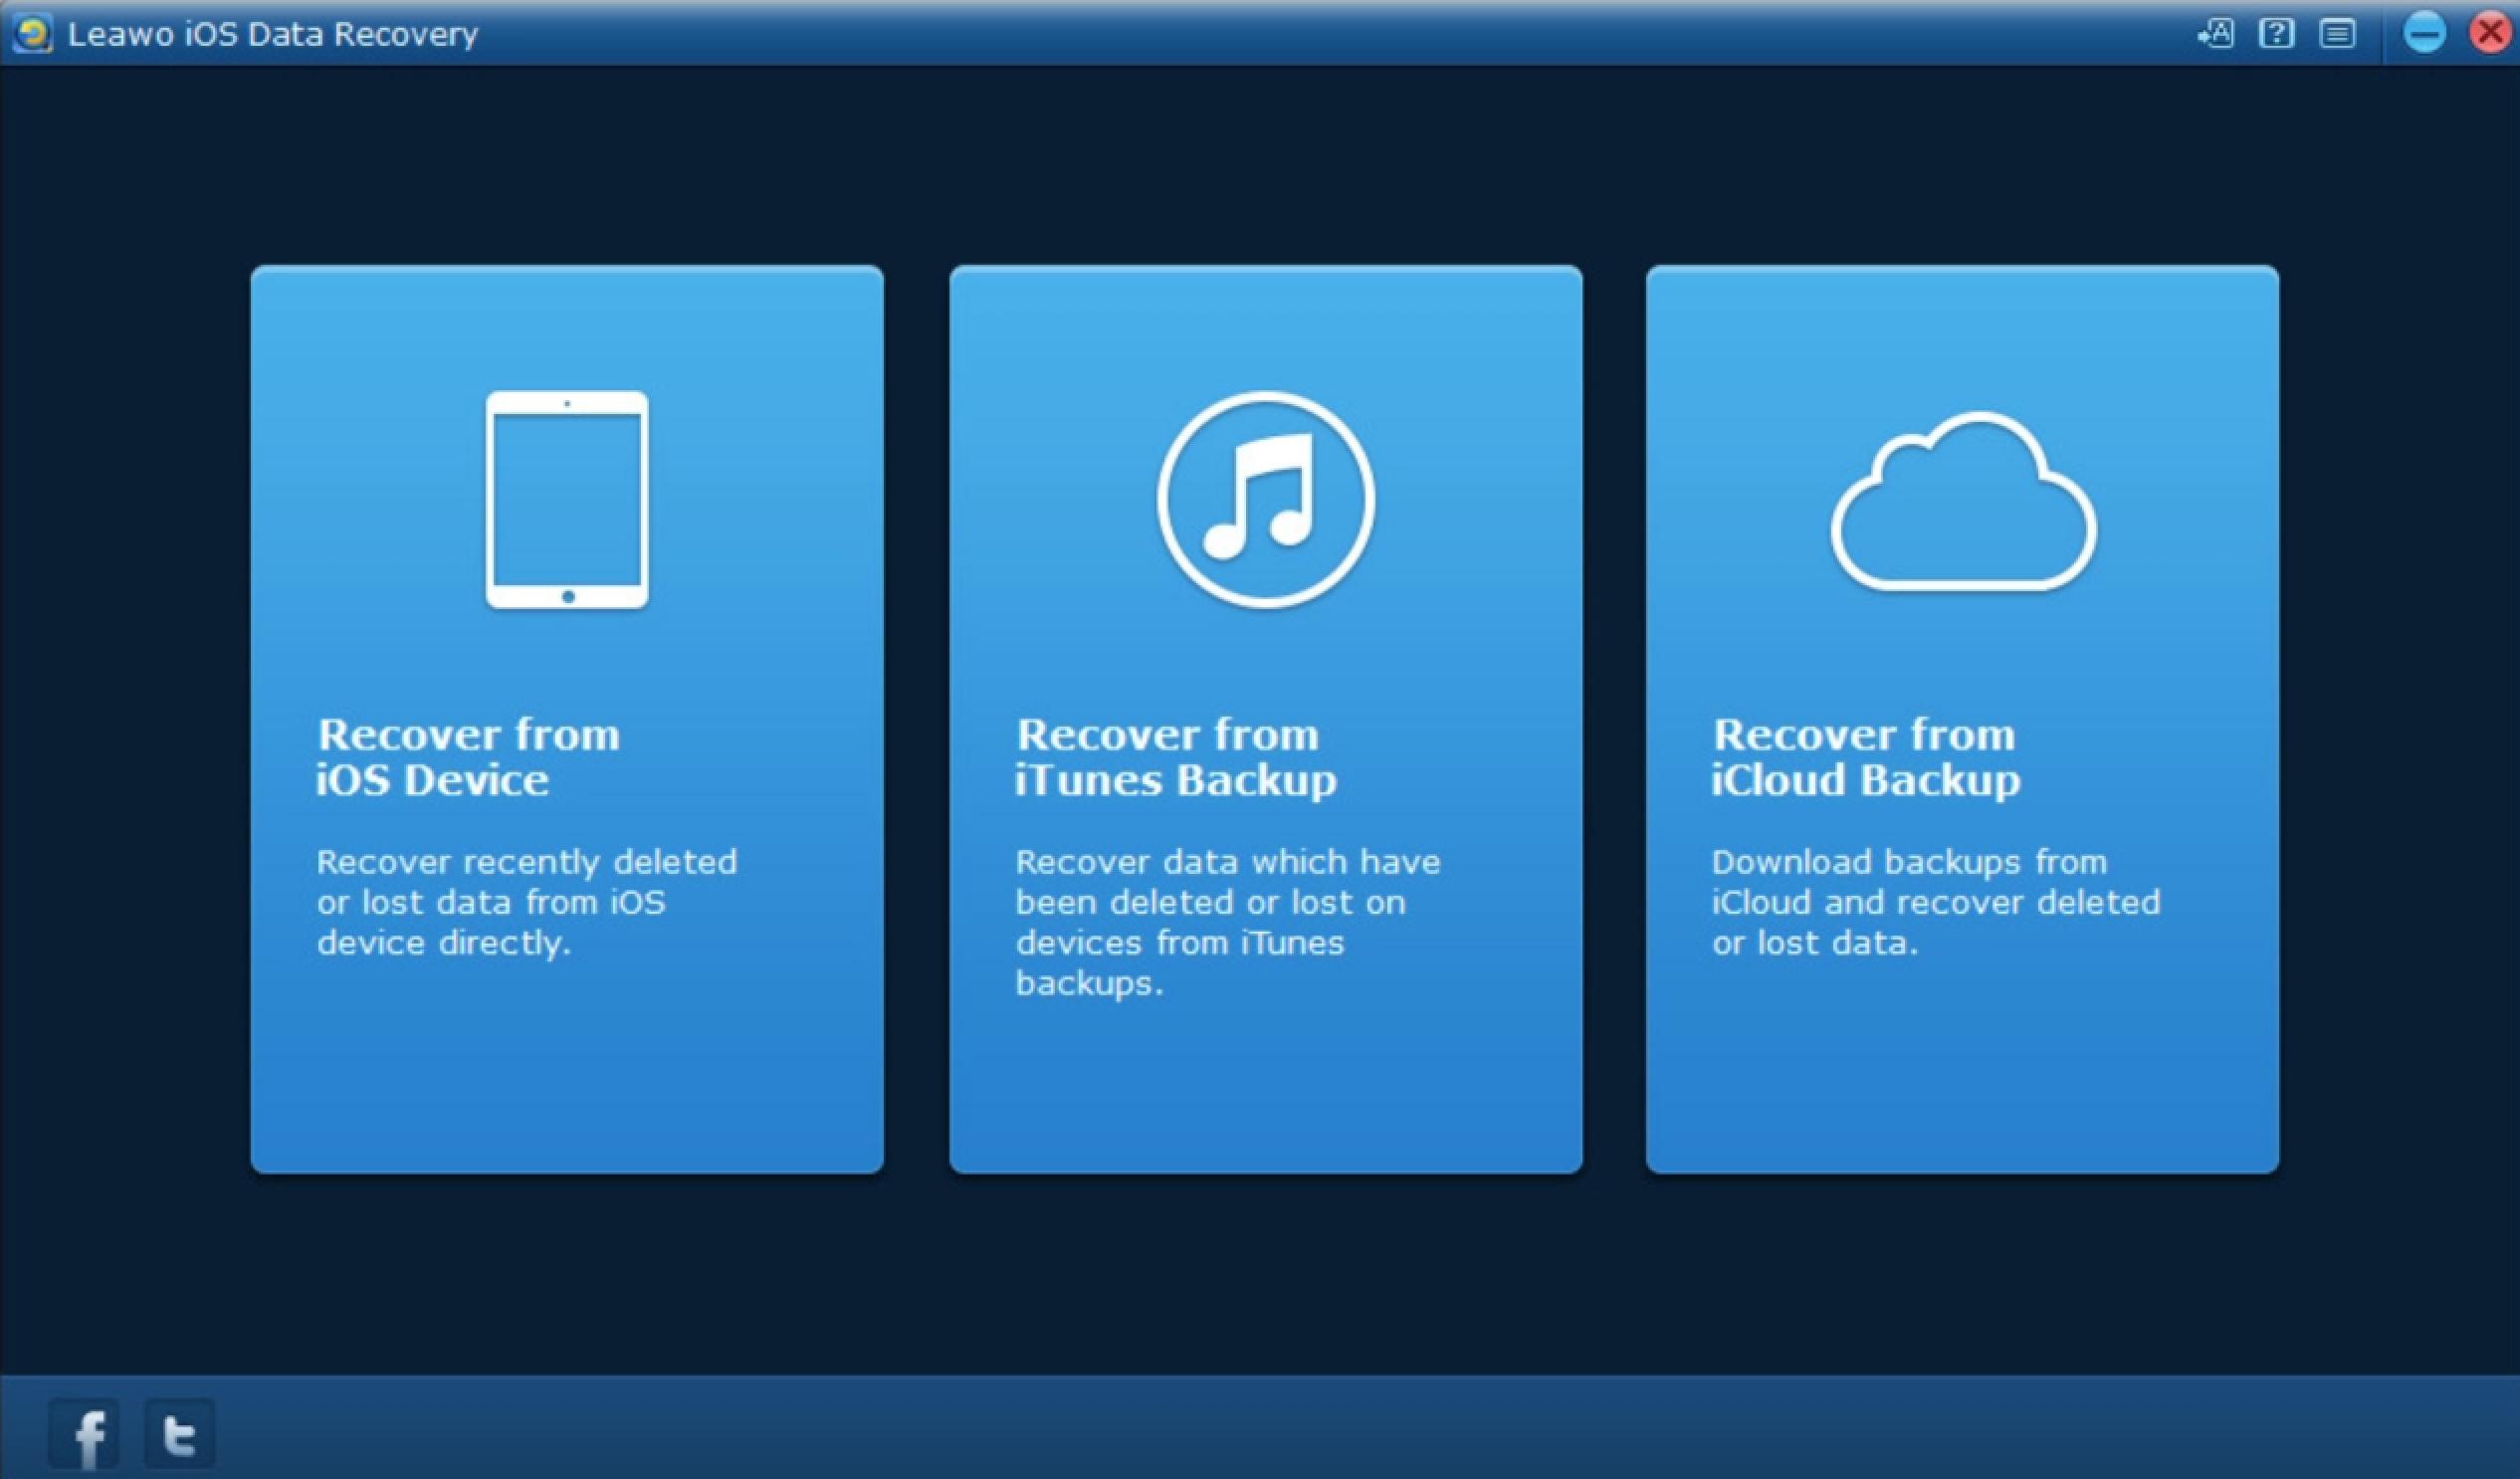 recover-data-with-Leawo-iOS-Data-Recovery-01